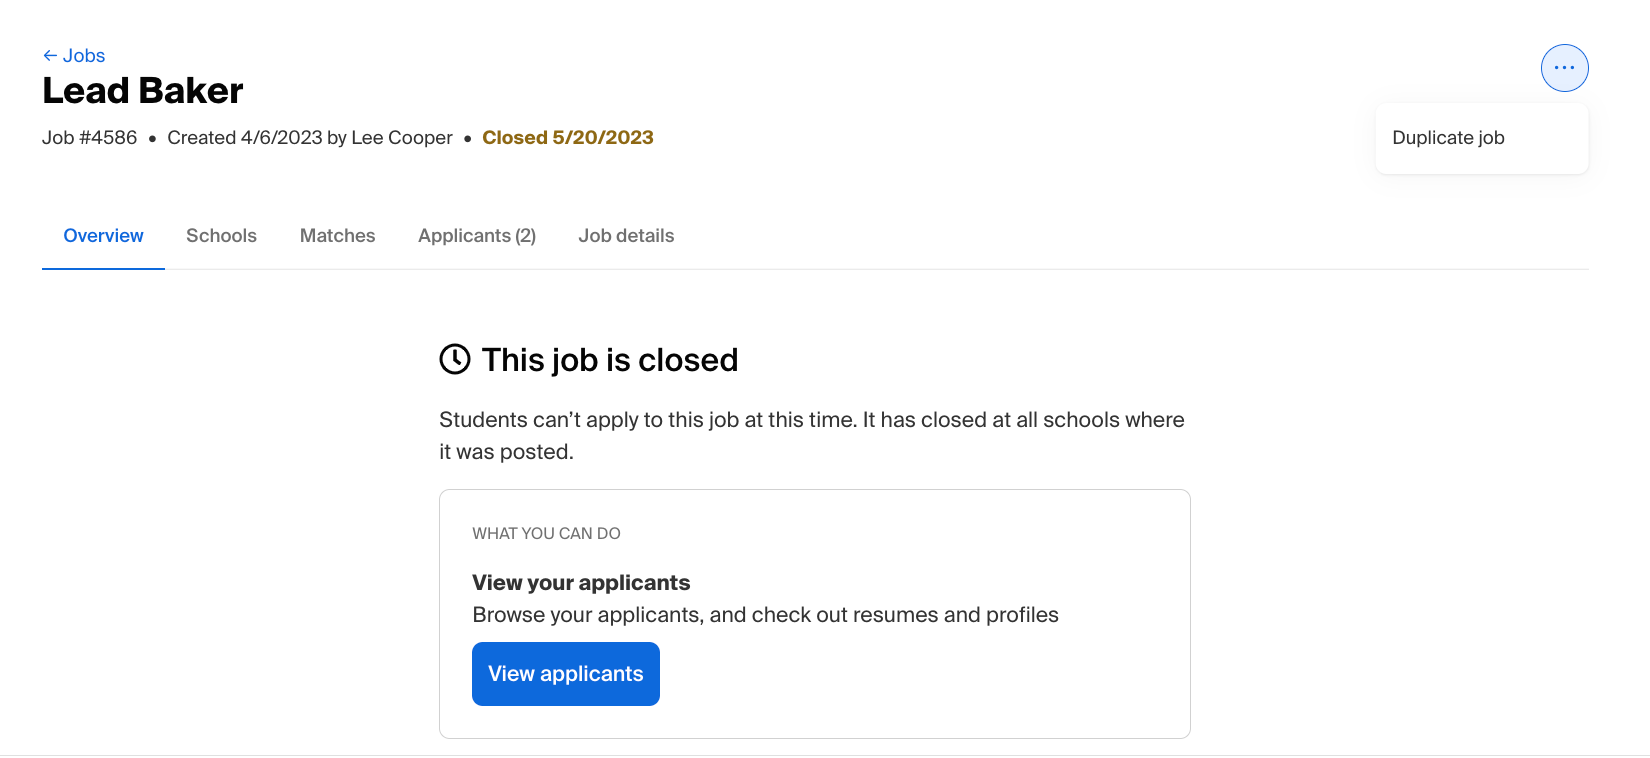 This job is closed.png